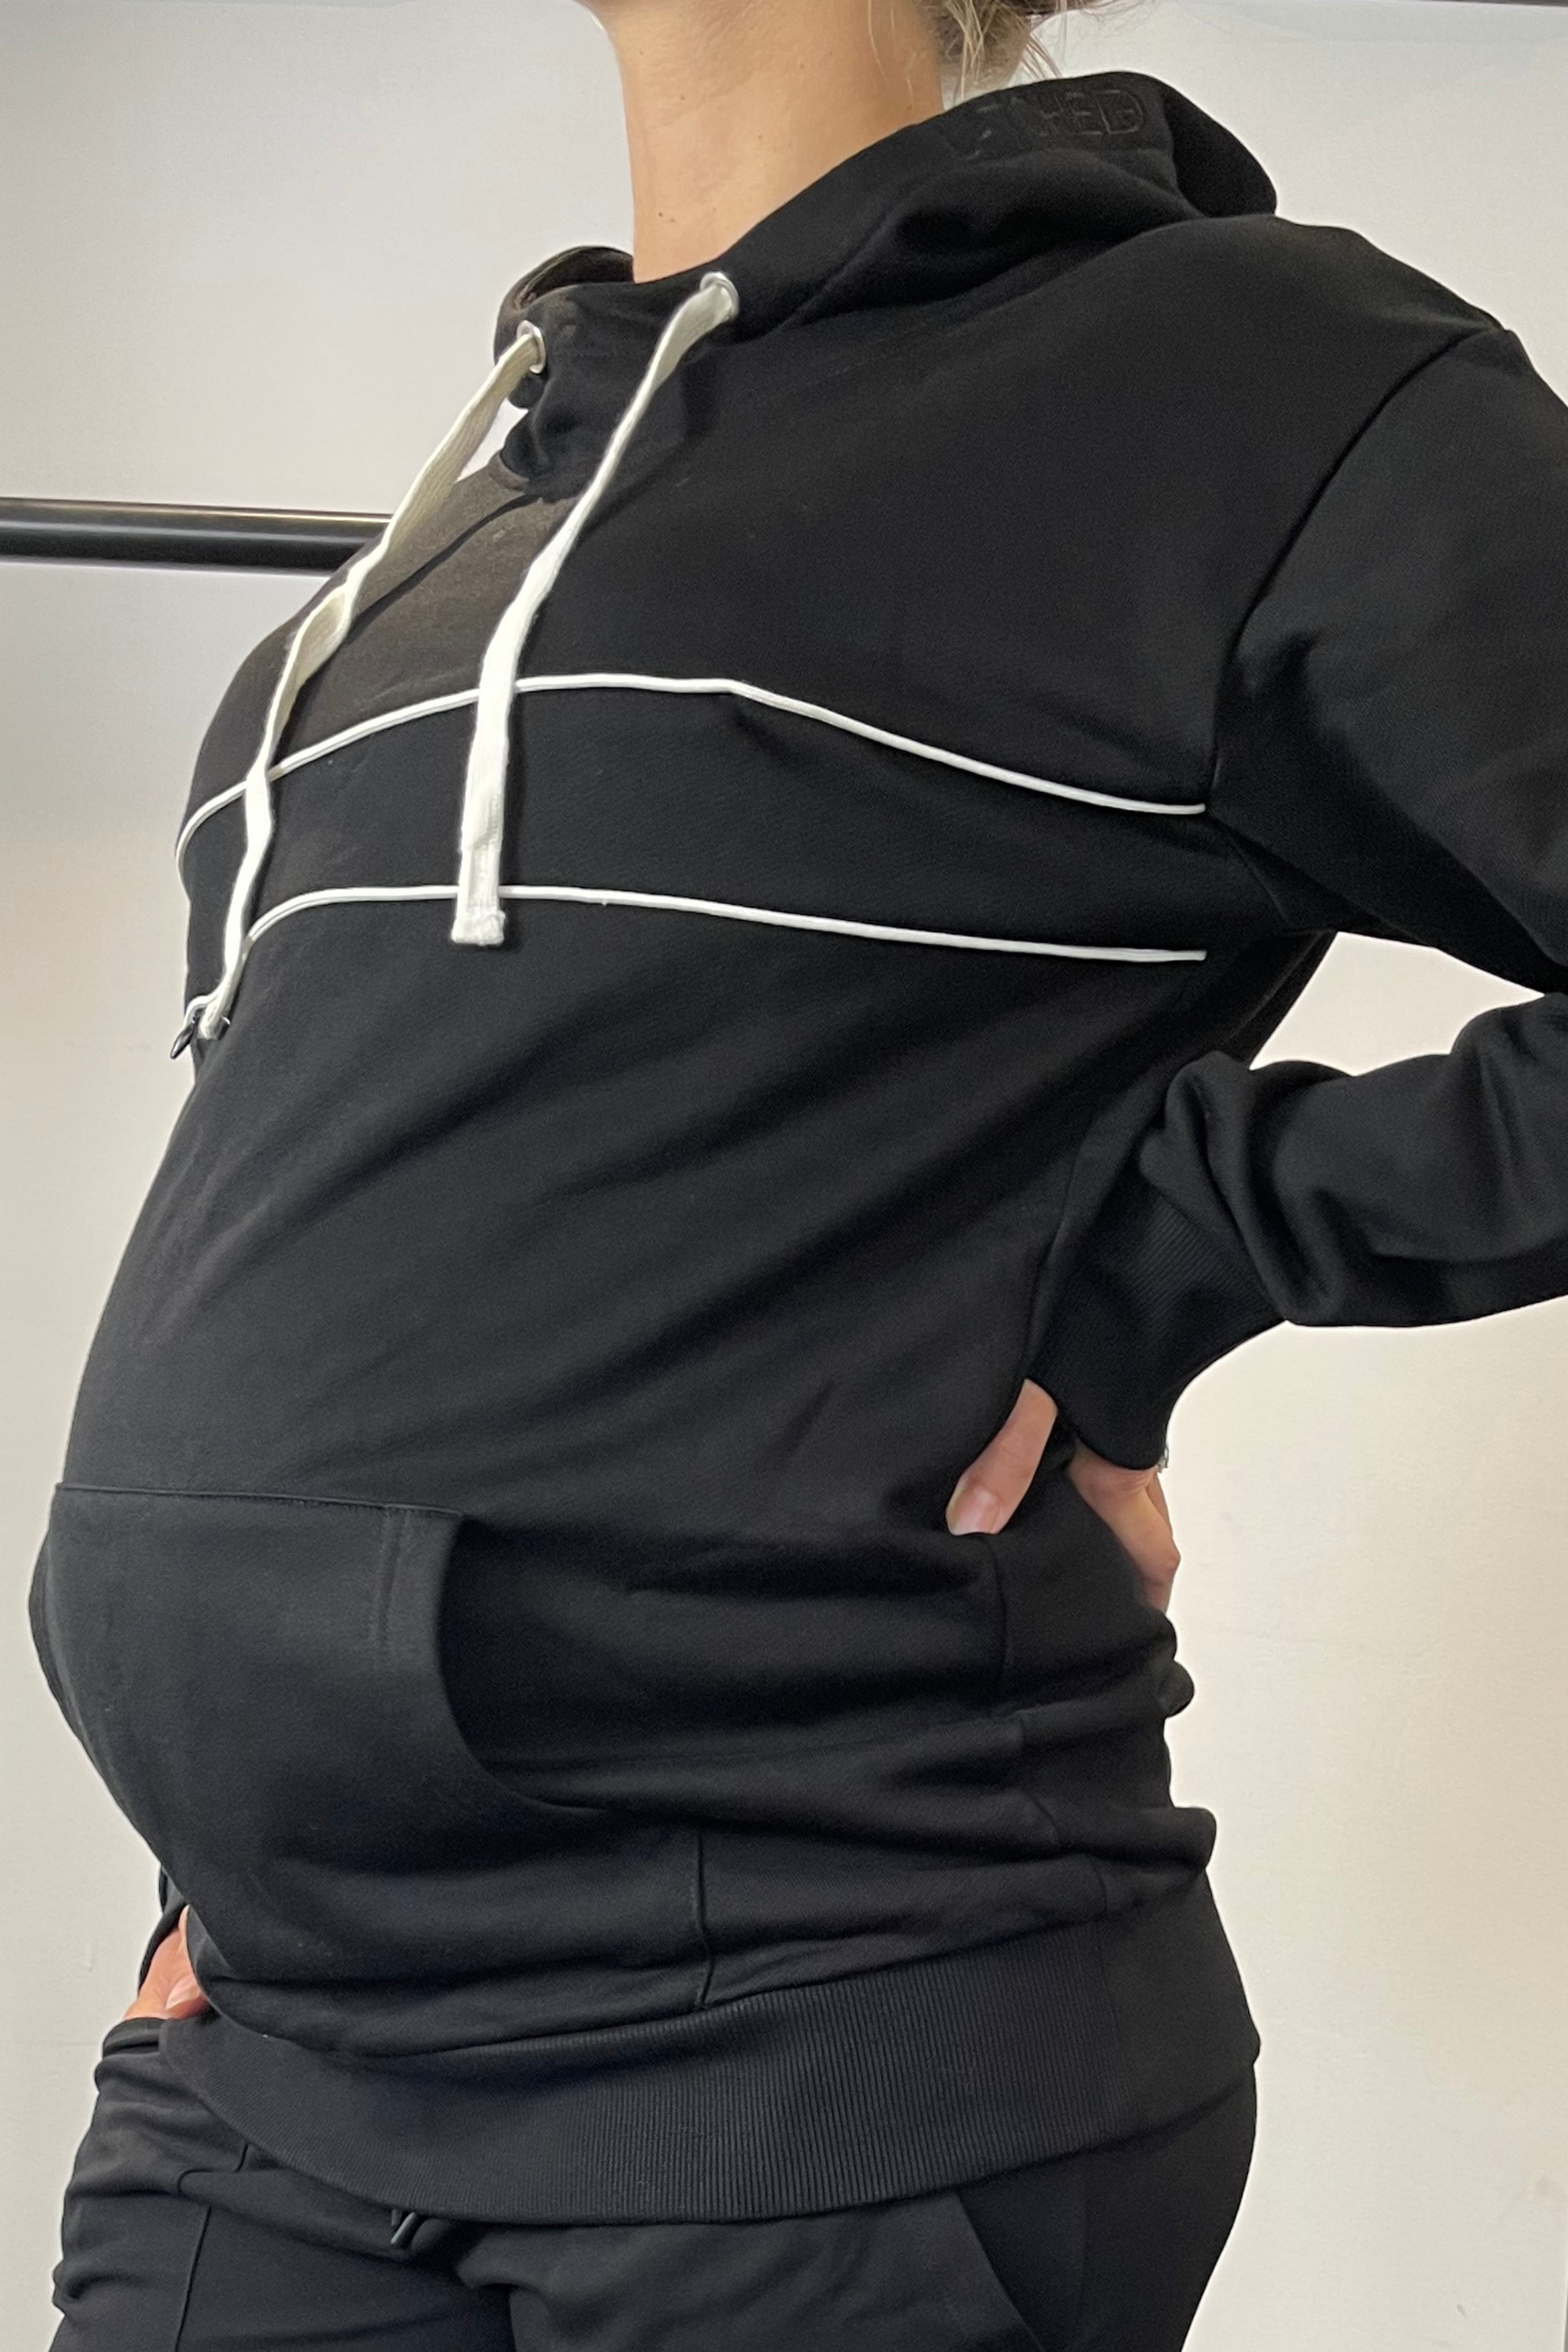 Black maternity and breastfeeding hoodie with side zips over baby bump